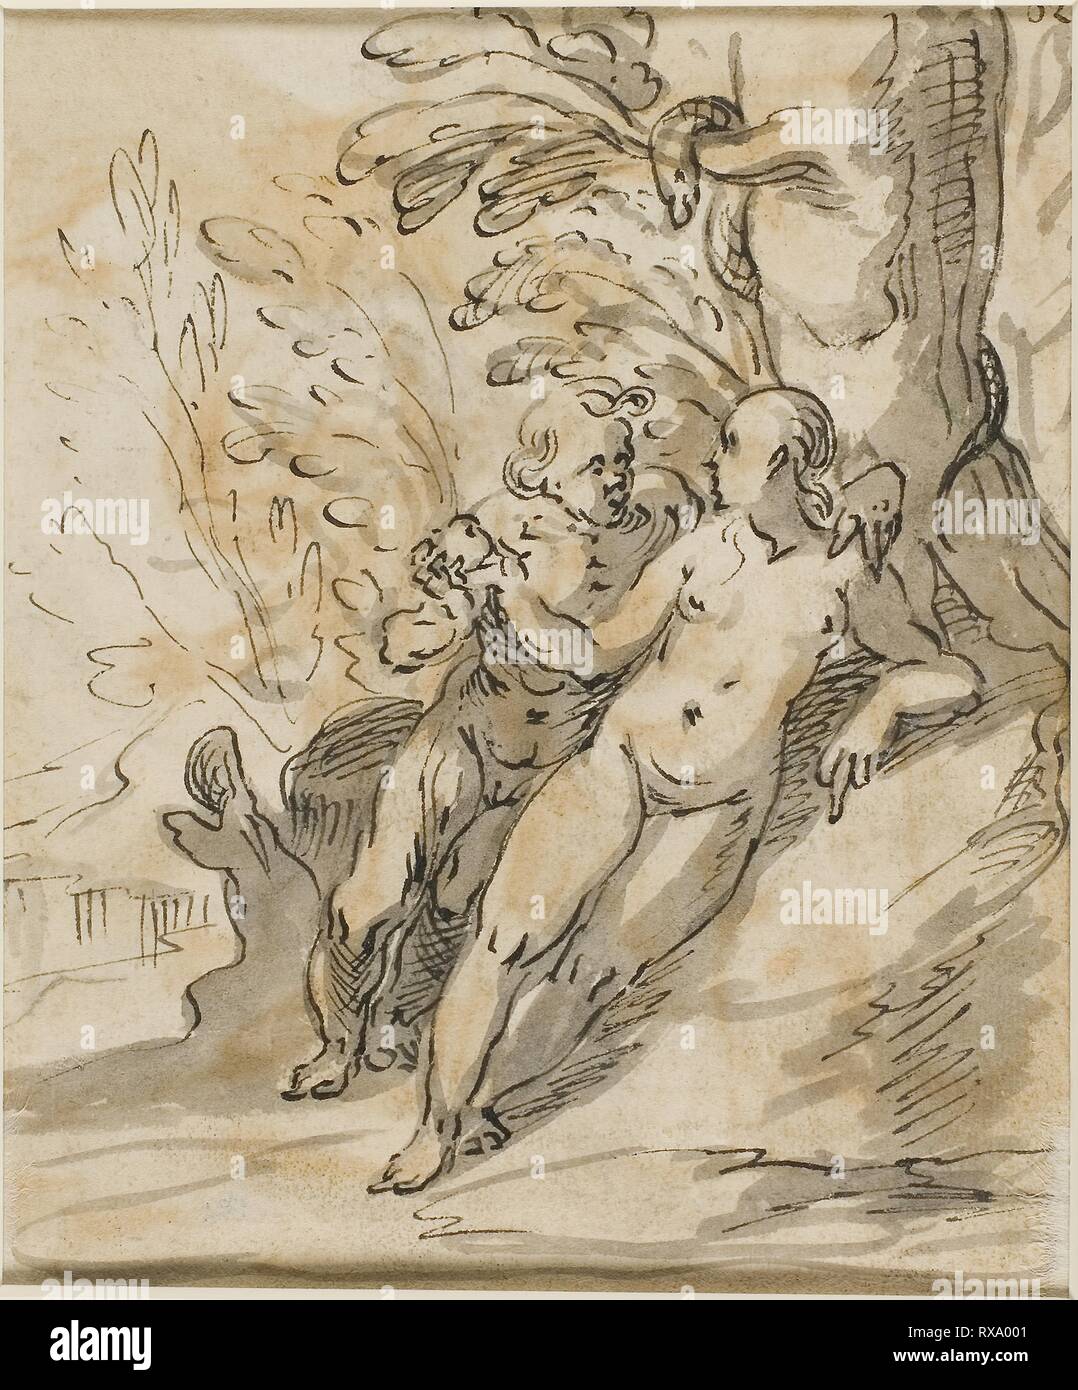 Adam and Eve Under a Tree (recto); Two Men in Dispute (verso). Hermann Weyer; German, c. 1596-1621. Date: 1605-1621. Dimensions: 184 x 156 mm. Pen and black ink, with brush and gray and brown wash, heightened with white gouache, on cream laid paper. Origin: Germany. Museum: The Chicago Art Institute. Stock Photo